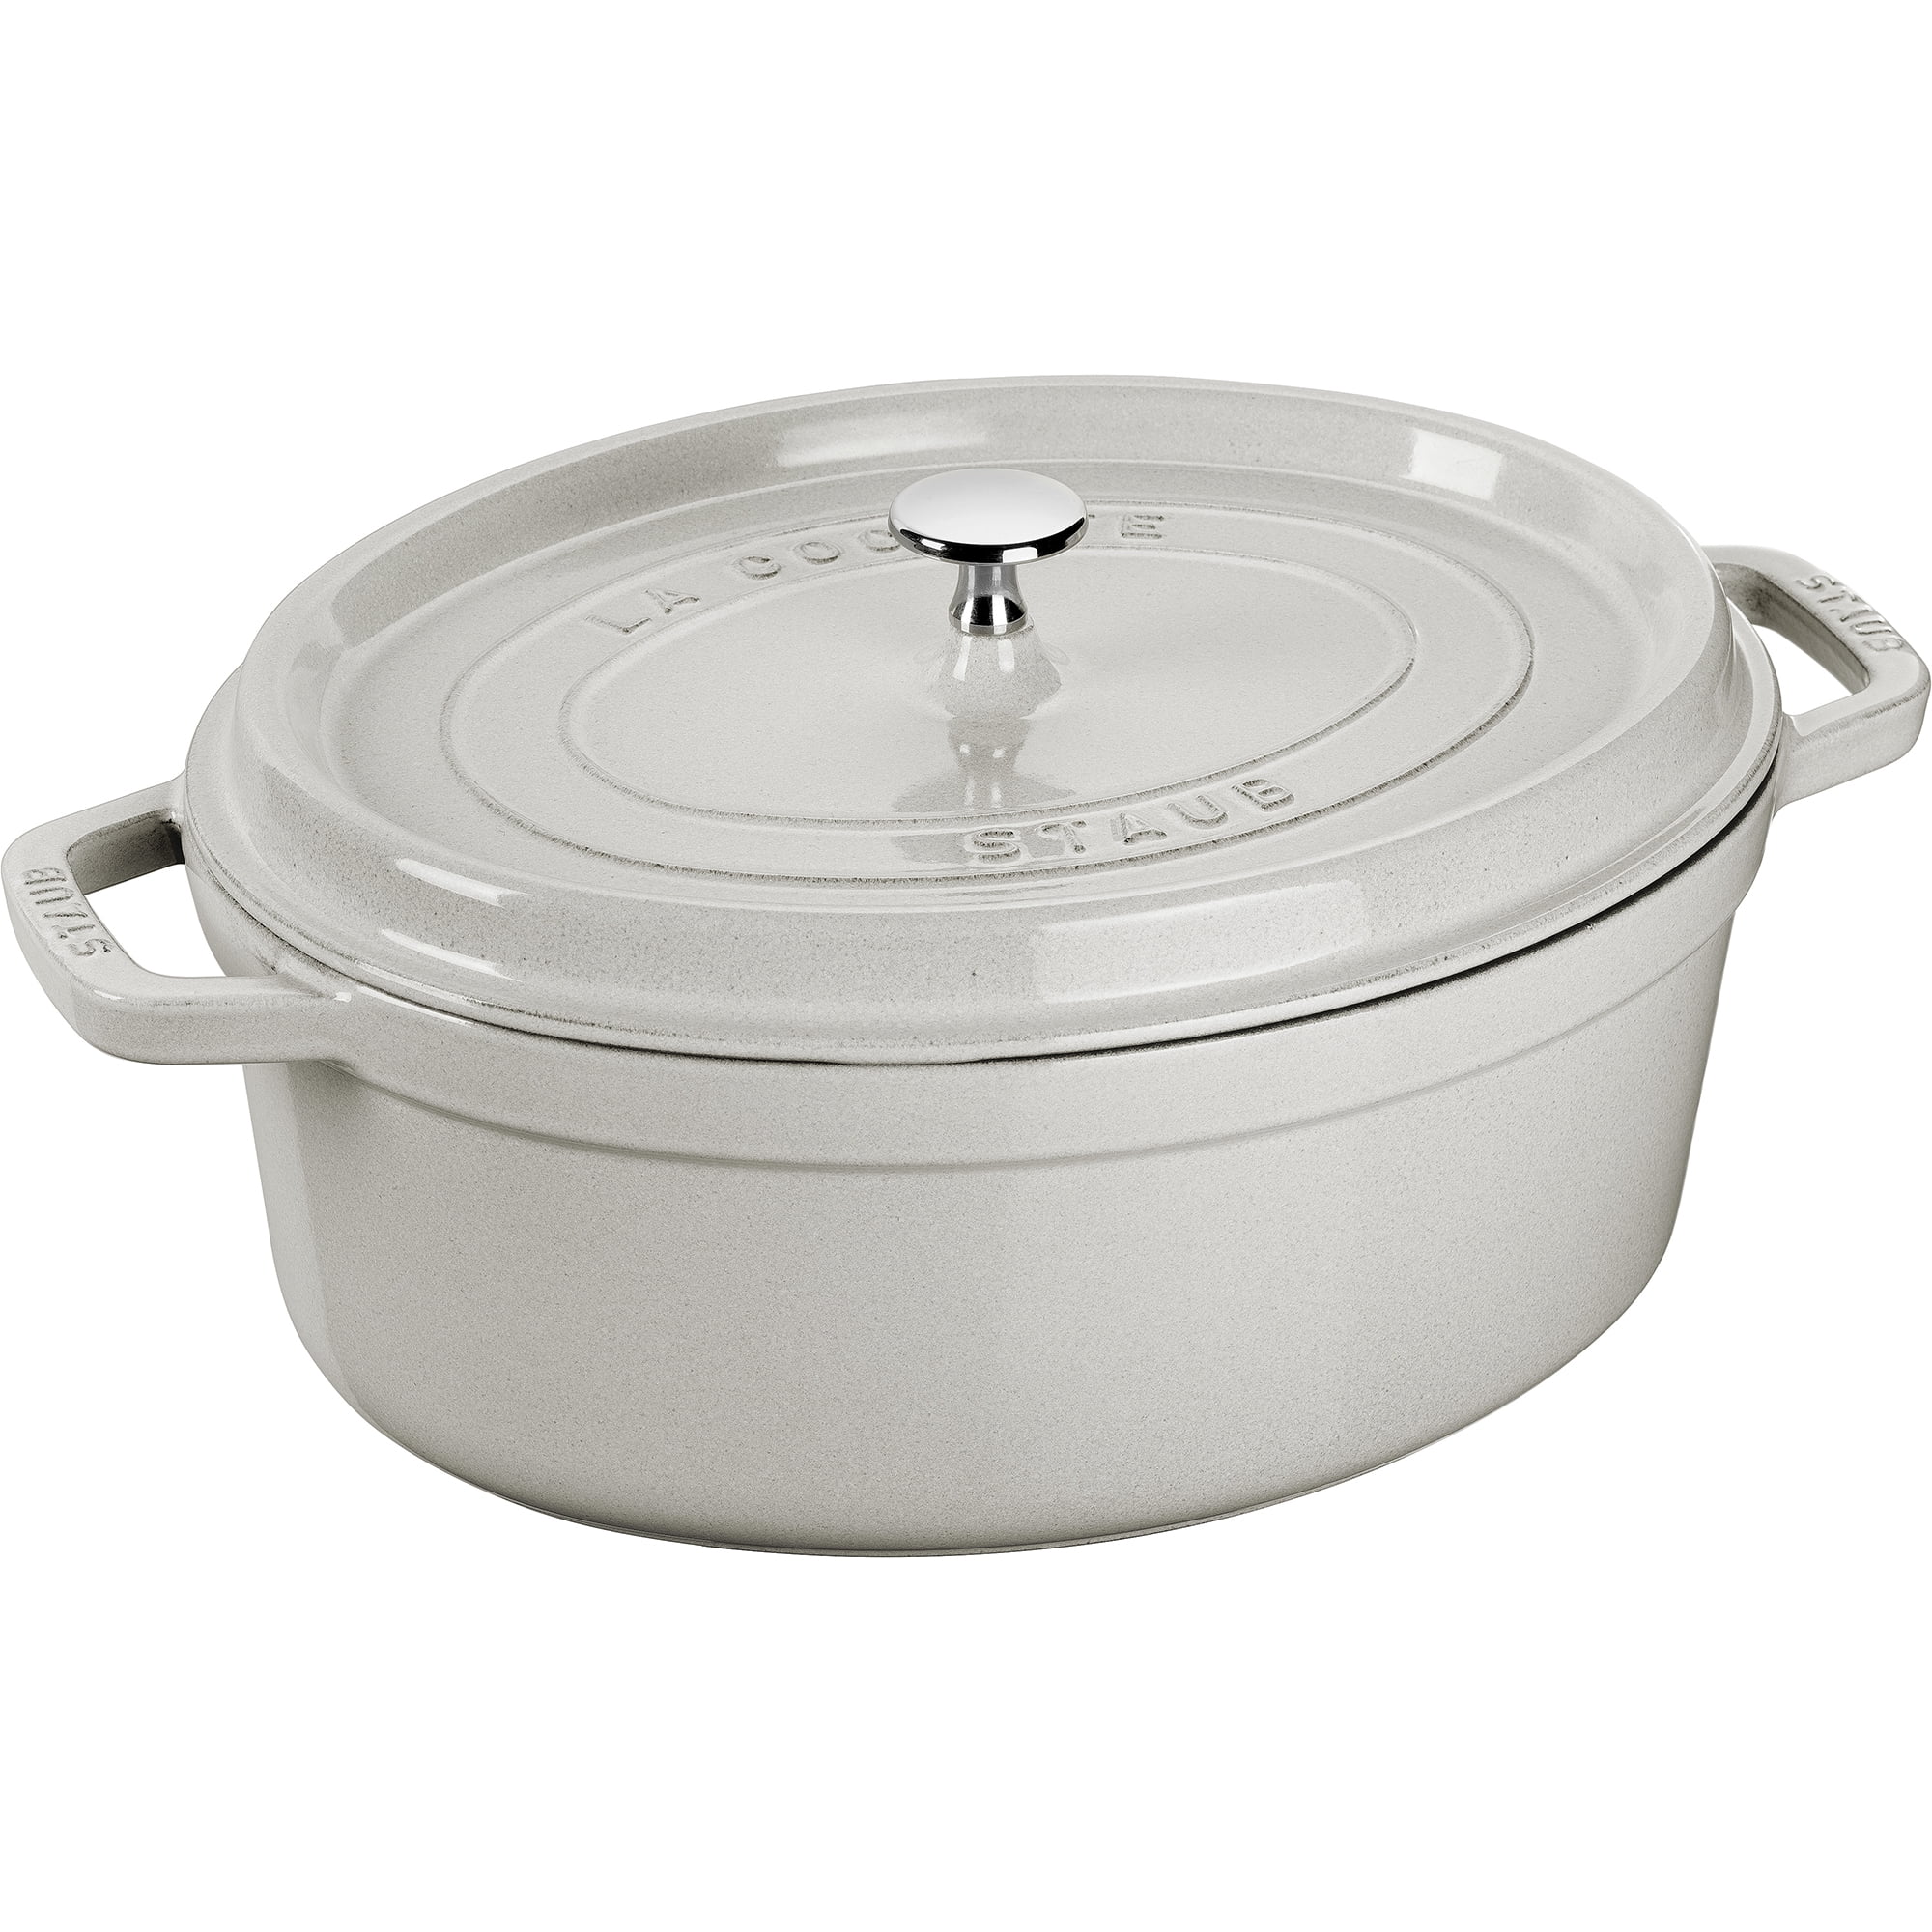 Staub Cast Iron Oval Cocotte, Dutch Oven, 5.75-quart, serves 5-6, Made in  France, Graphite, 5.75-qt - Fry's Food Stores